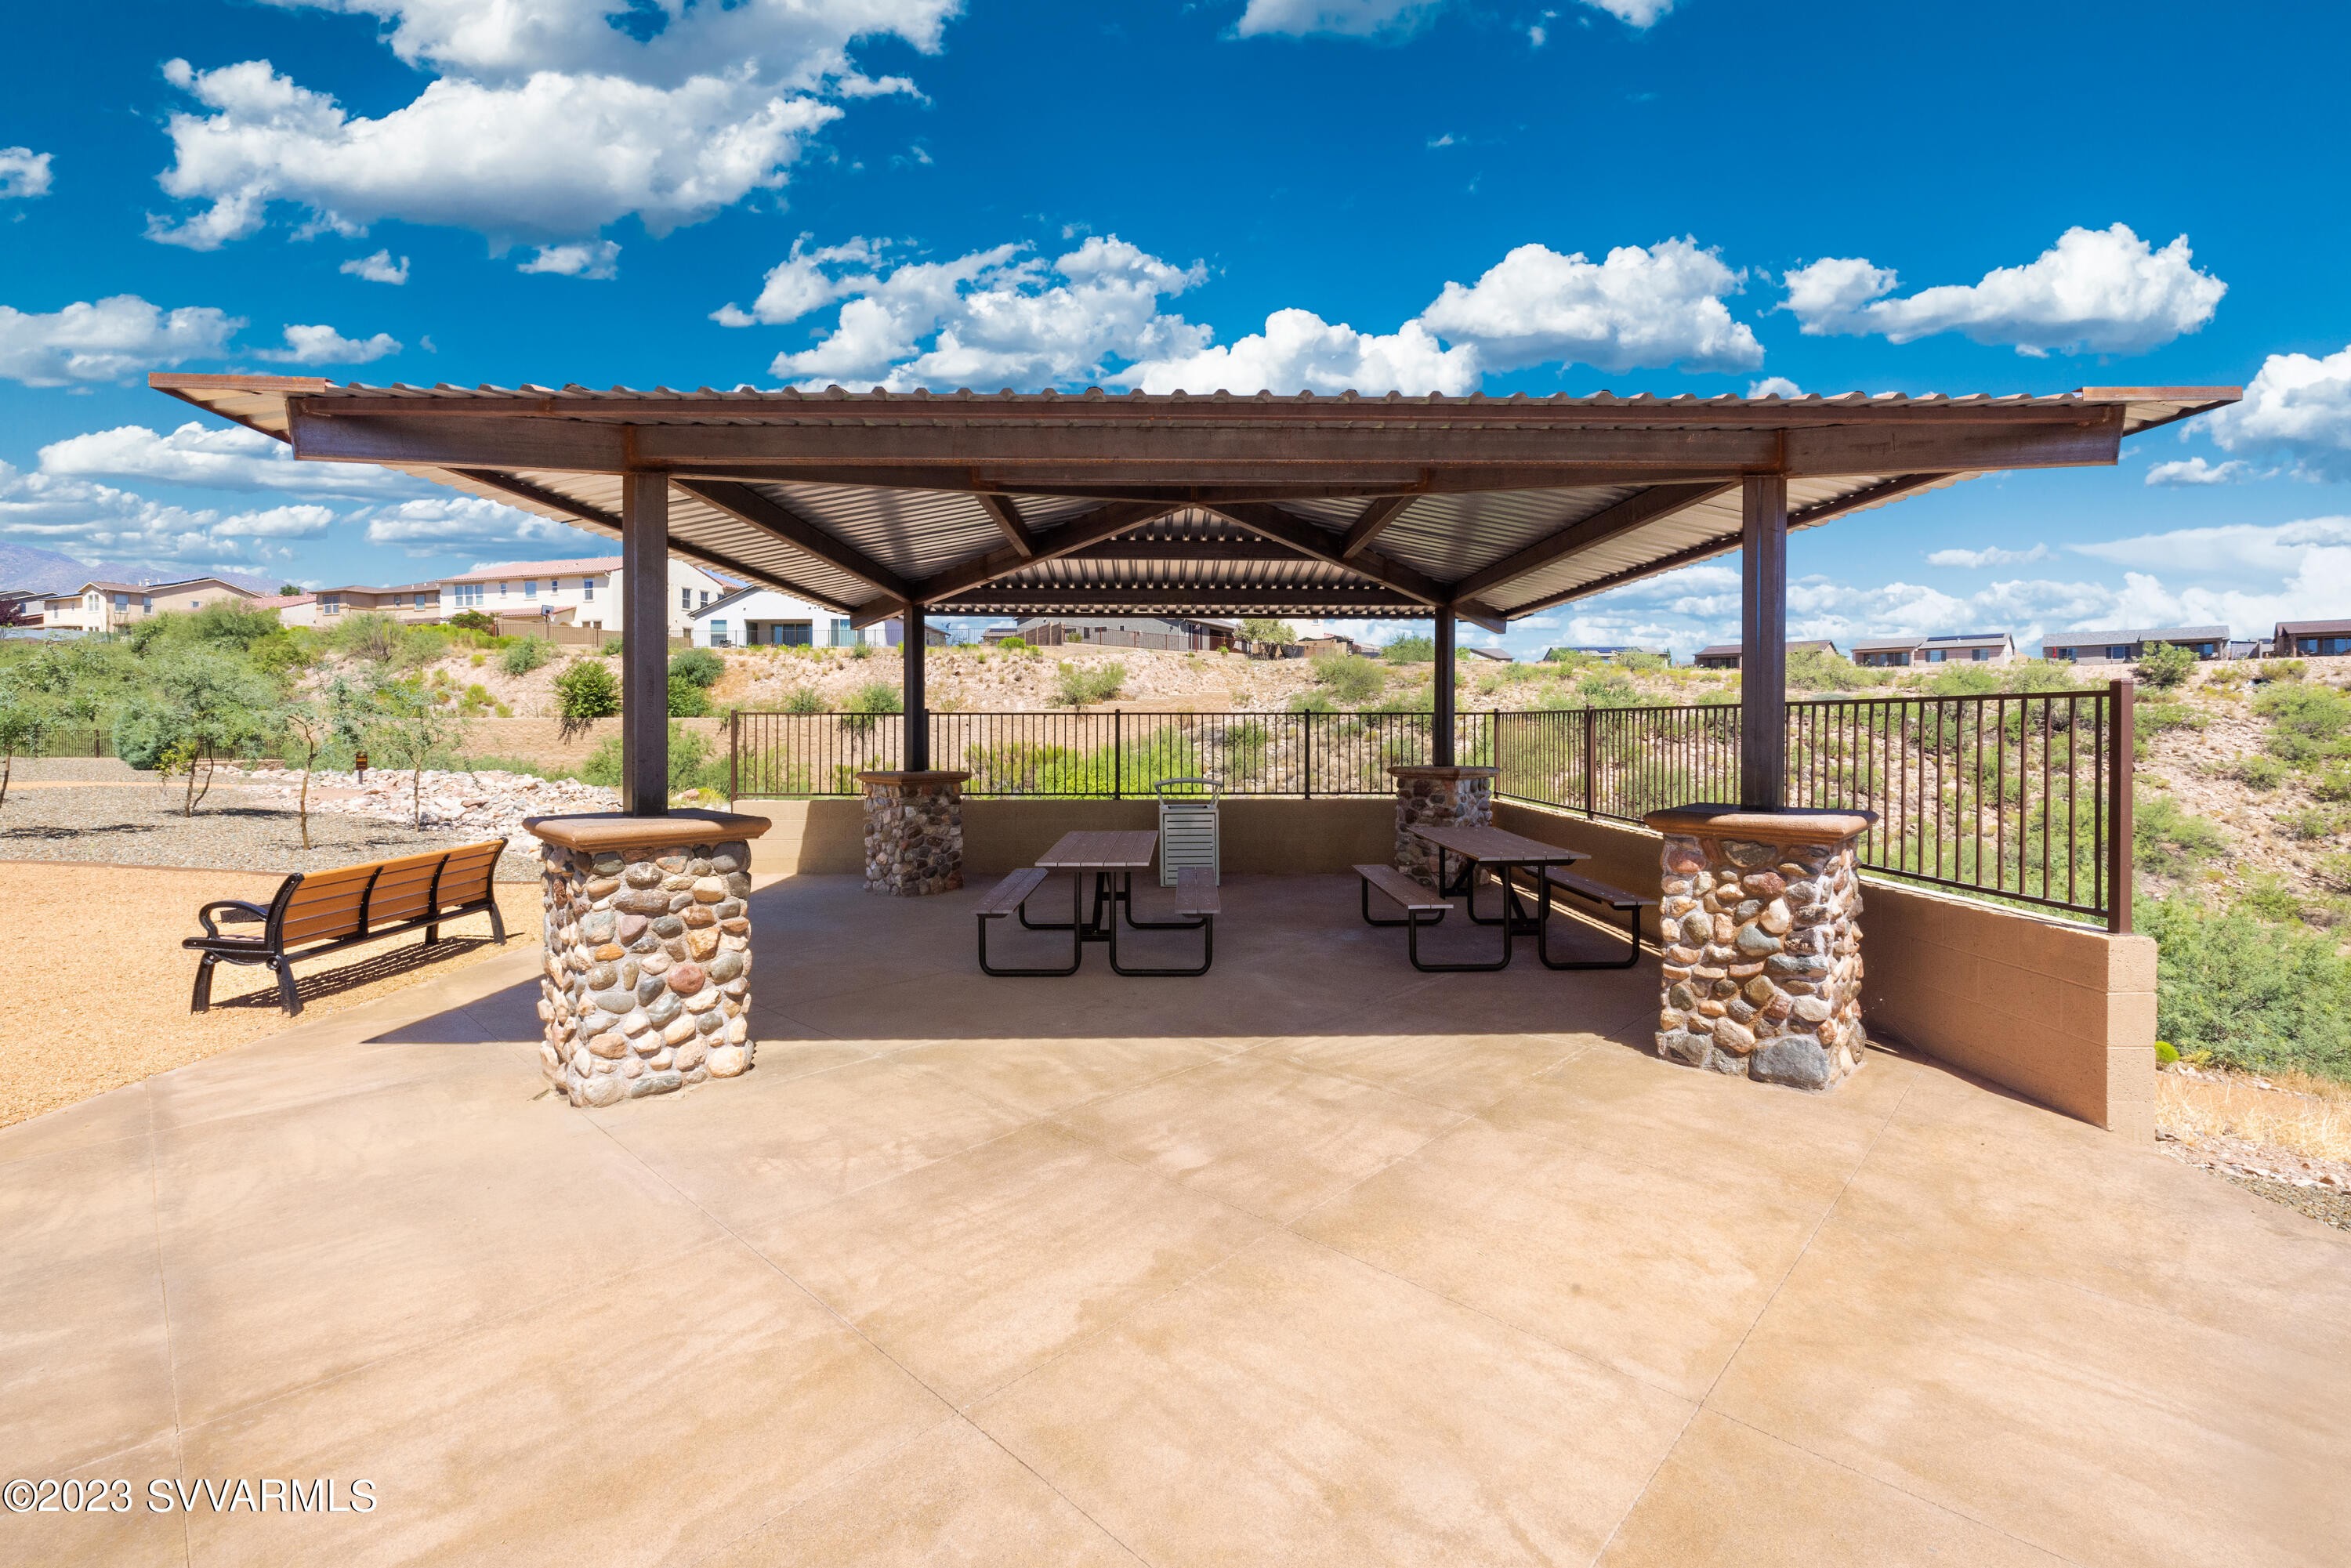 632 King Copper Rd, Clarkdale, Arizona, 86324, United States, 3 Bedrooms Bedrooms, ,3 BathroomsBathrooms,Residential,For Sale,632 King Copper Rd,1445800